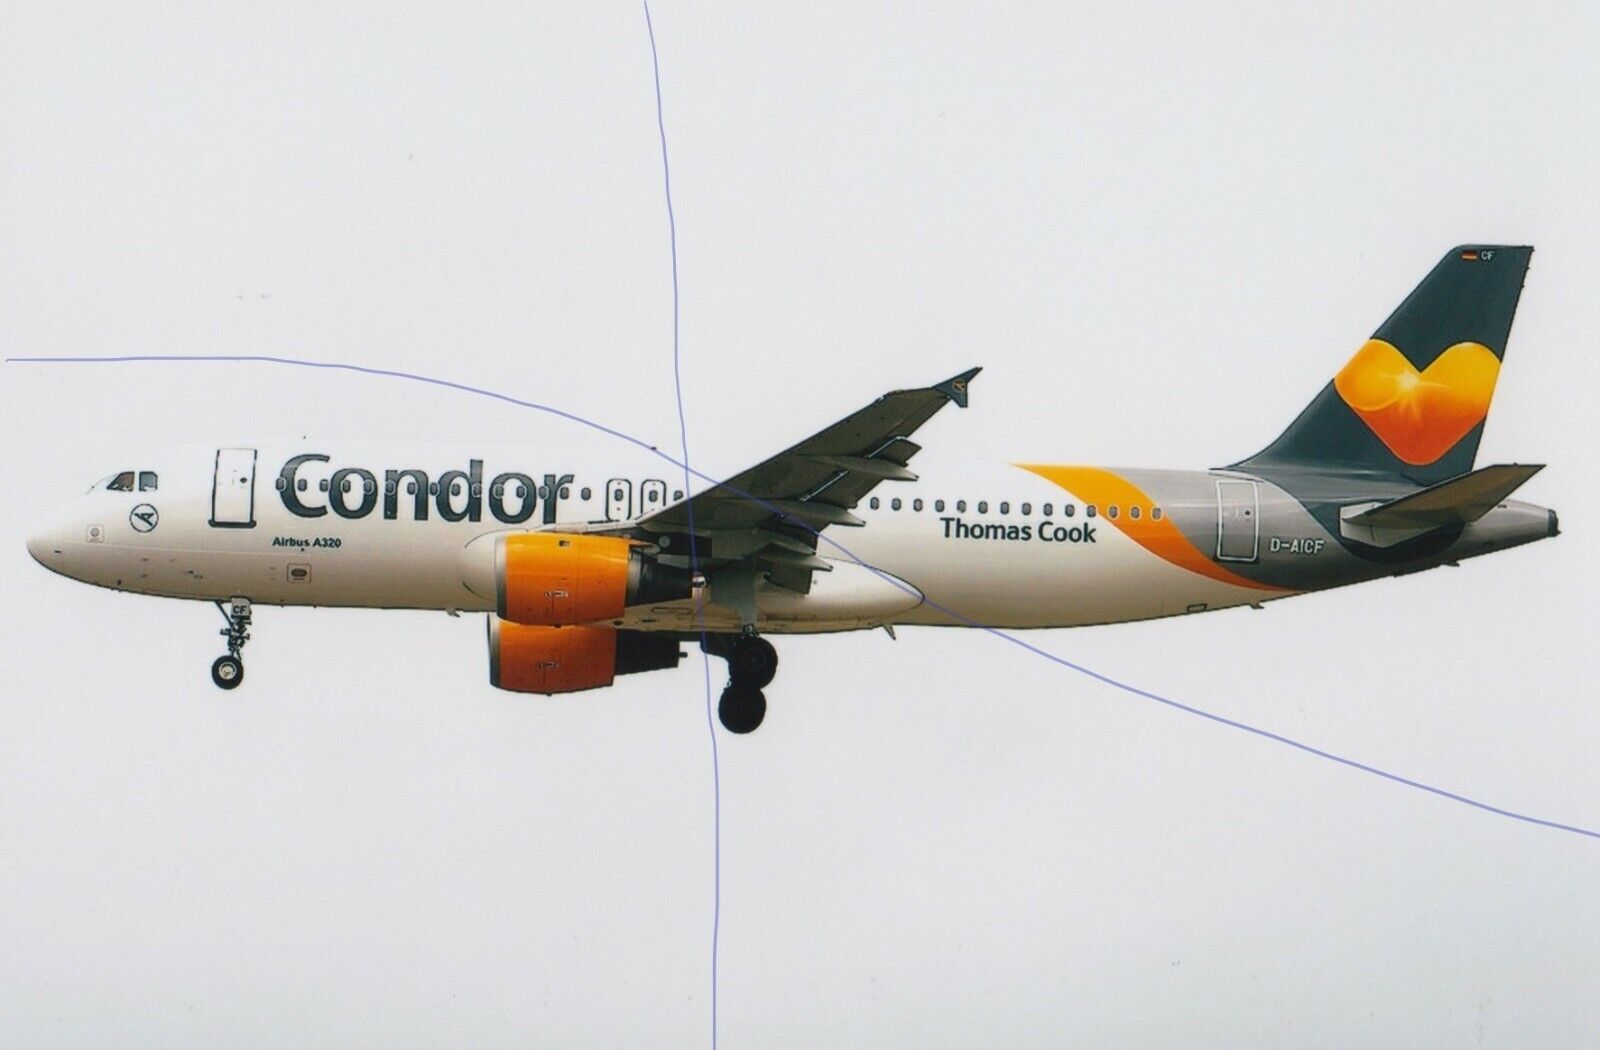 CIVIL AIRCRAFT PLANE PHOTO OF A CONDOR PICTURE PHOTOGRAPH OF D-AICF  AIRBUS A320